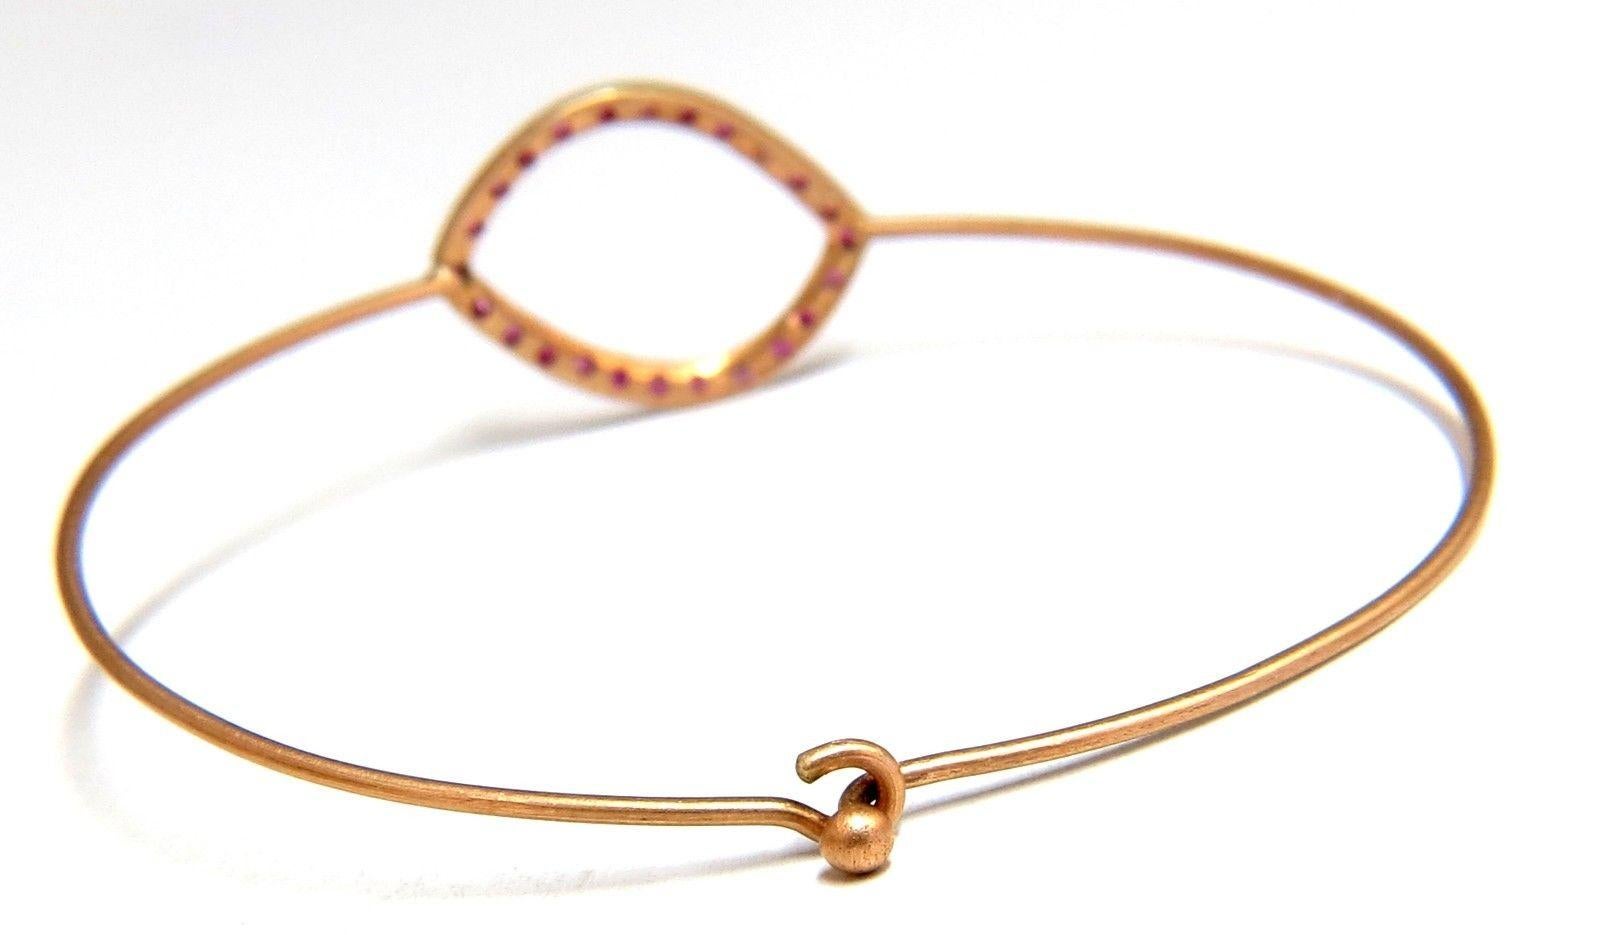 Handmade.36ct Natural Pink Sapphire Wire Bangle Bracelet

2.1 grams.

14kt. Pink gold. 

Measures 6 inches (wearable length)

15mm Wide Top Frame 